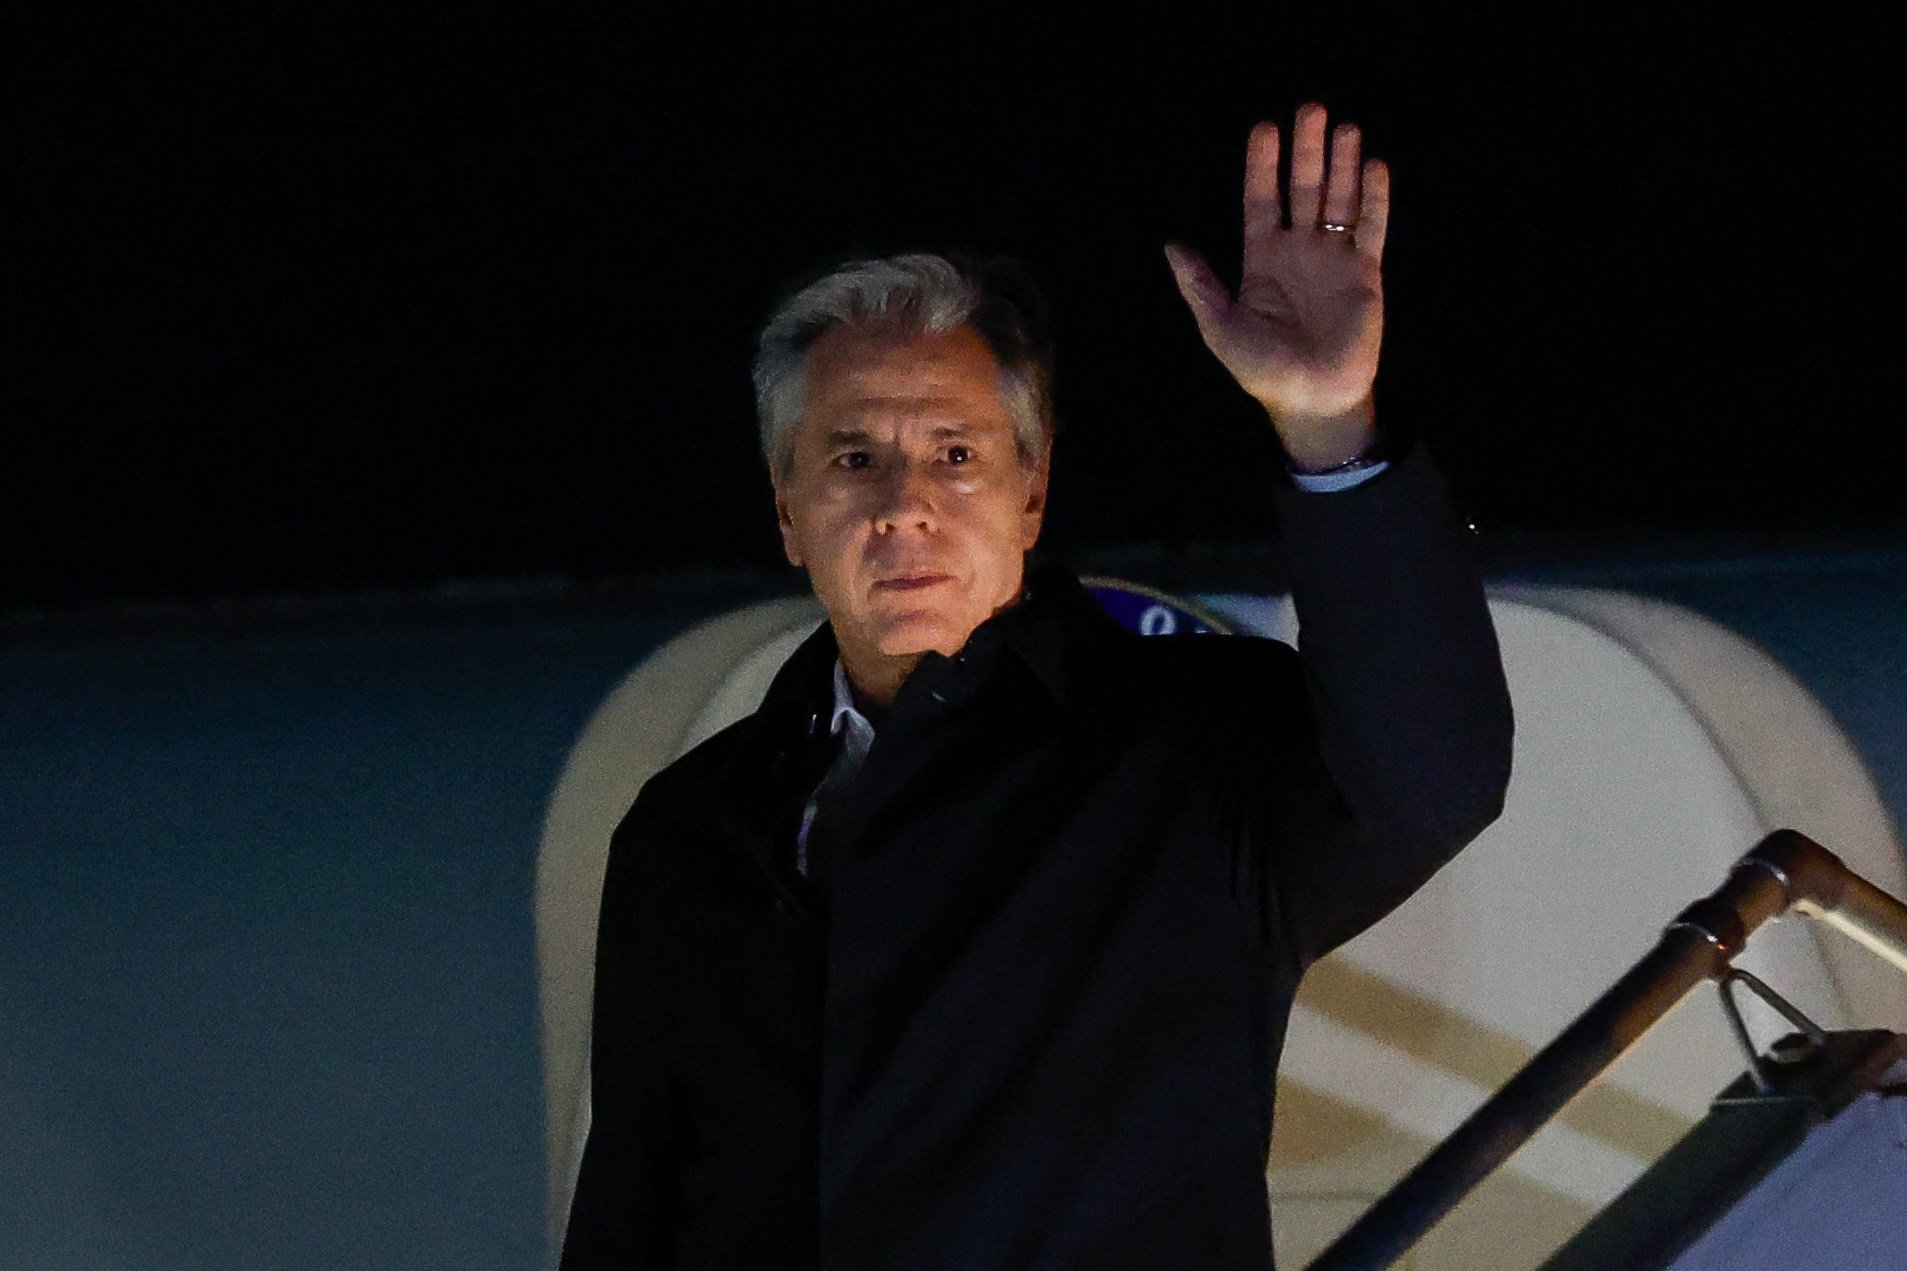 US Secretary of State Antony Blinken arrives in Amman on Saturday as part of the first leg of a trip that includes visits to both Israel and West Bank. Photo: AFP